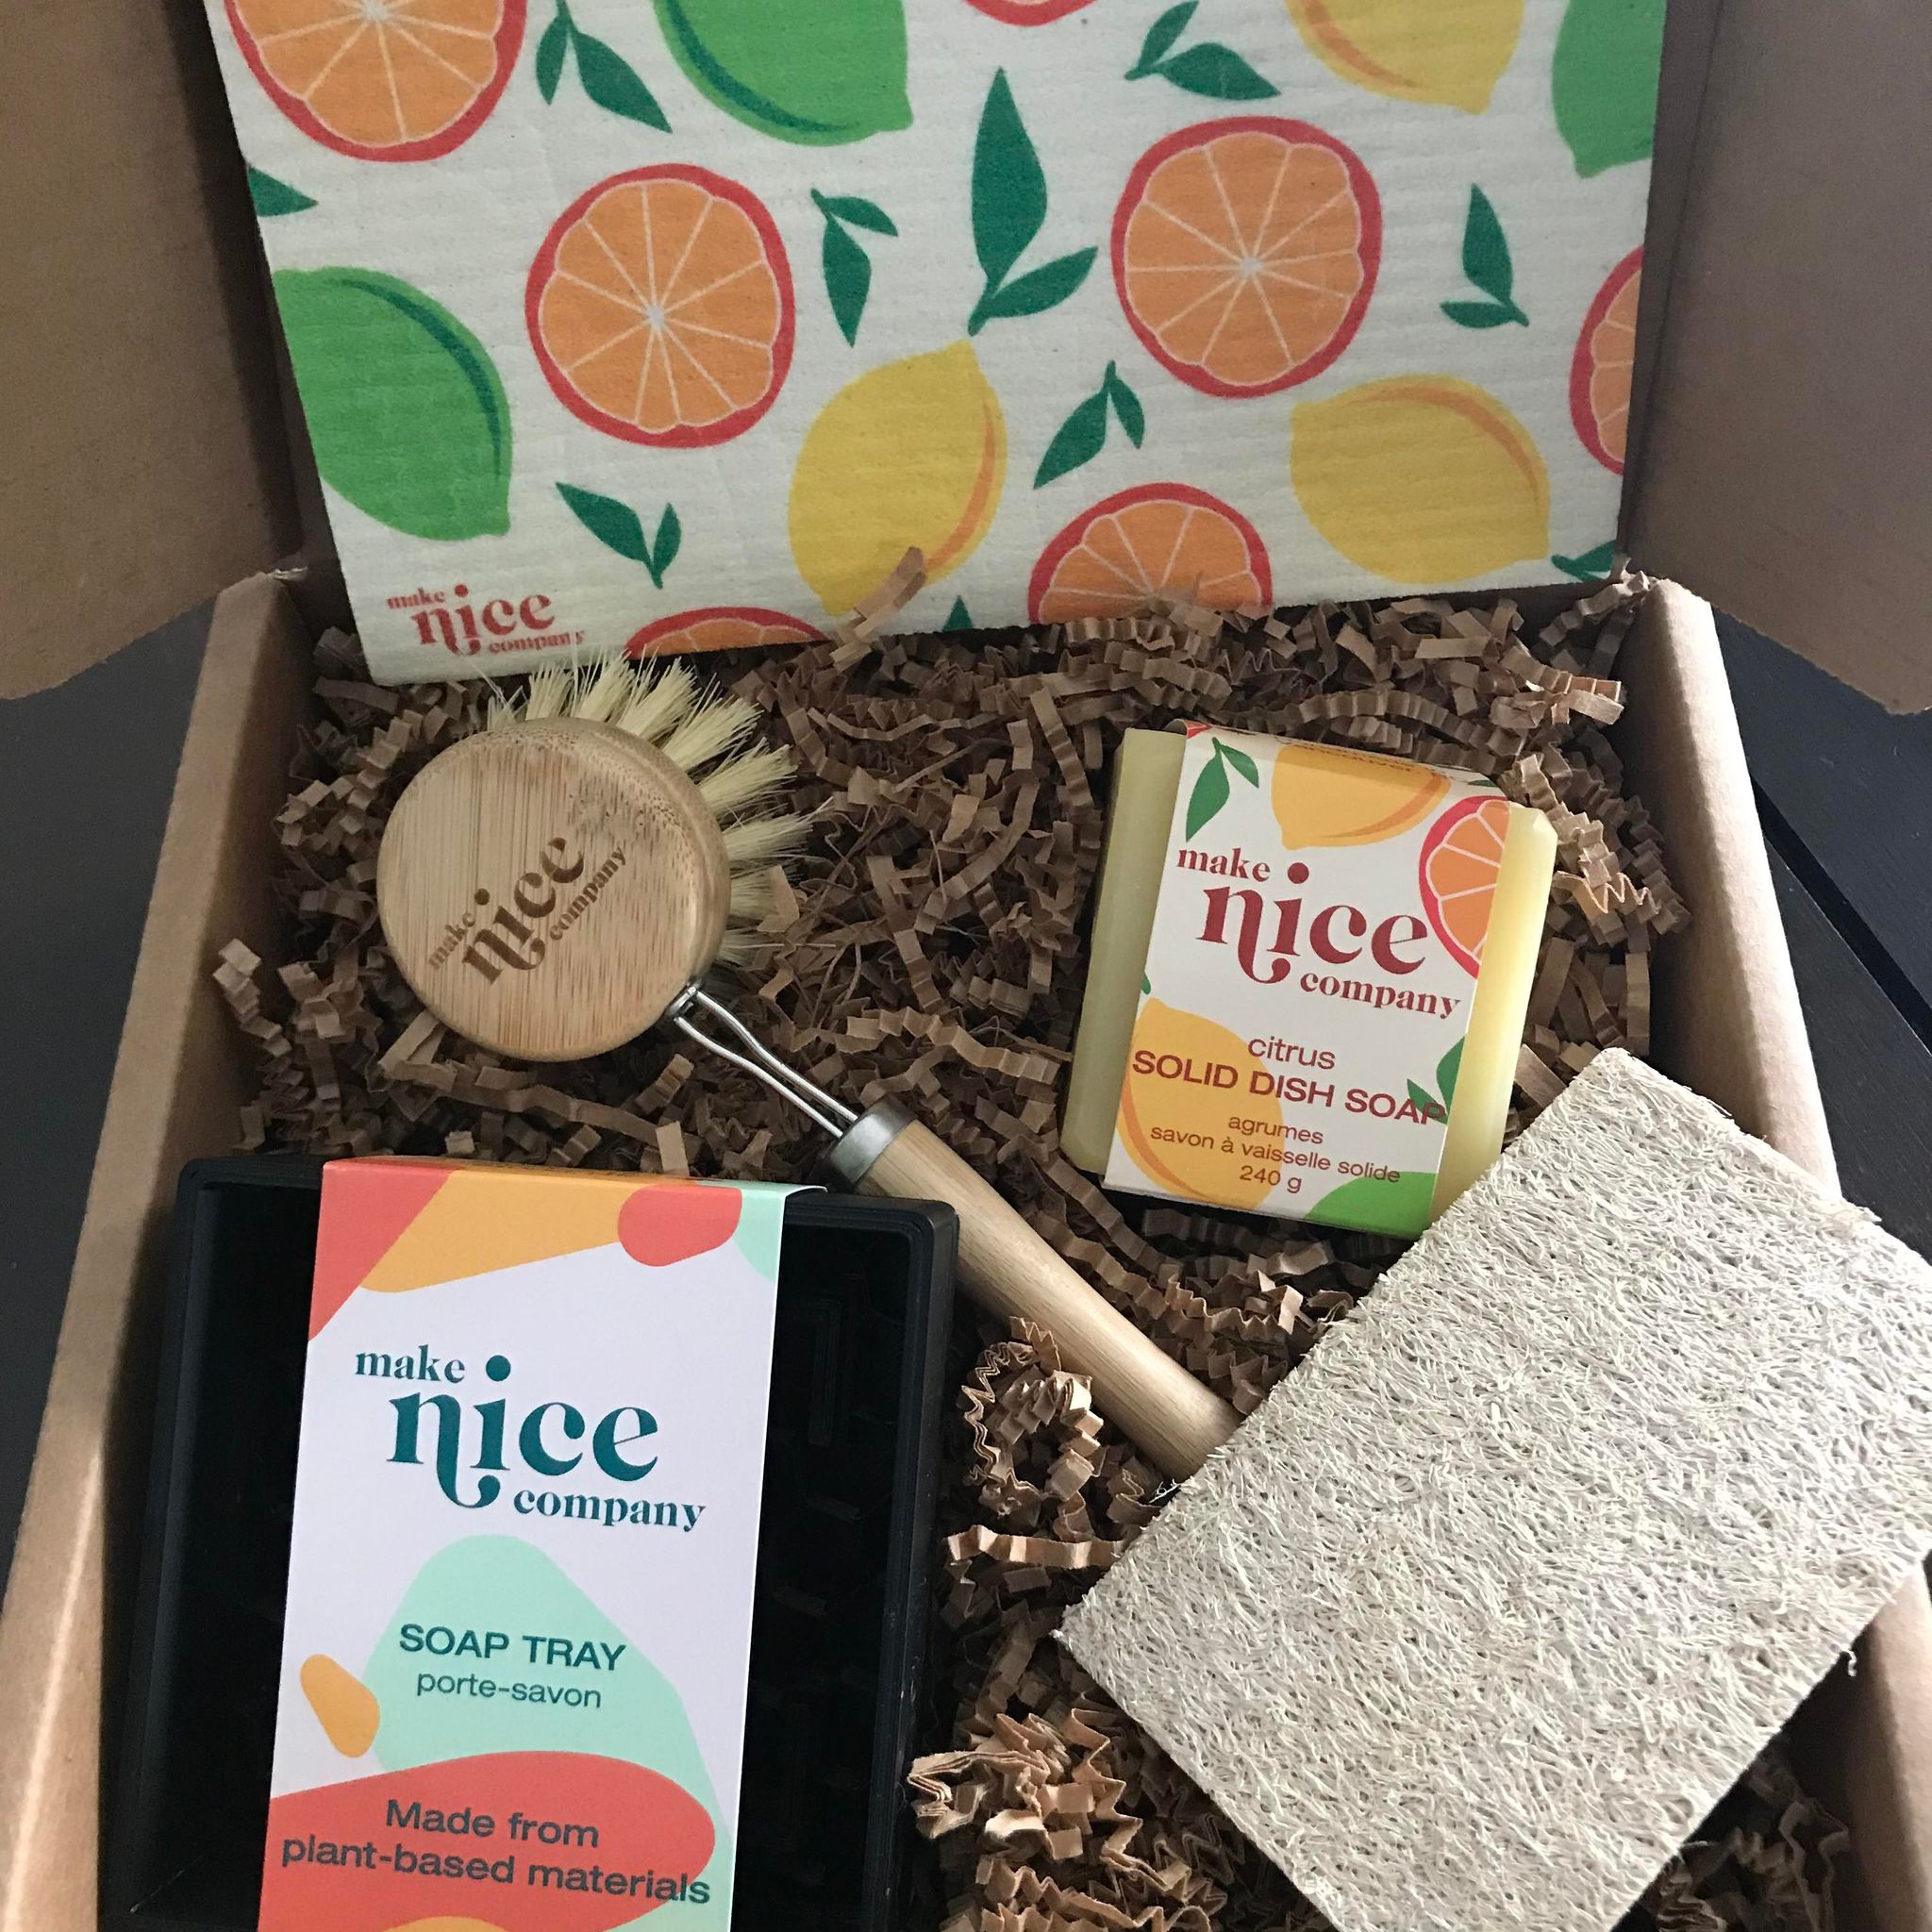 Citrus dish soap bar eco gift set made in Canada by the Make Nice Company includes a sponge cloth, a citrus solid dish soap cube, a dish brush, a plant=based soap tray and an expandable loofah sponge